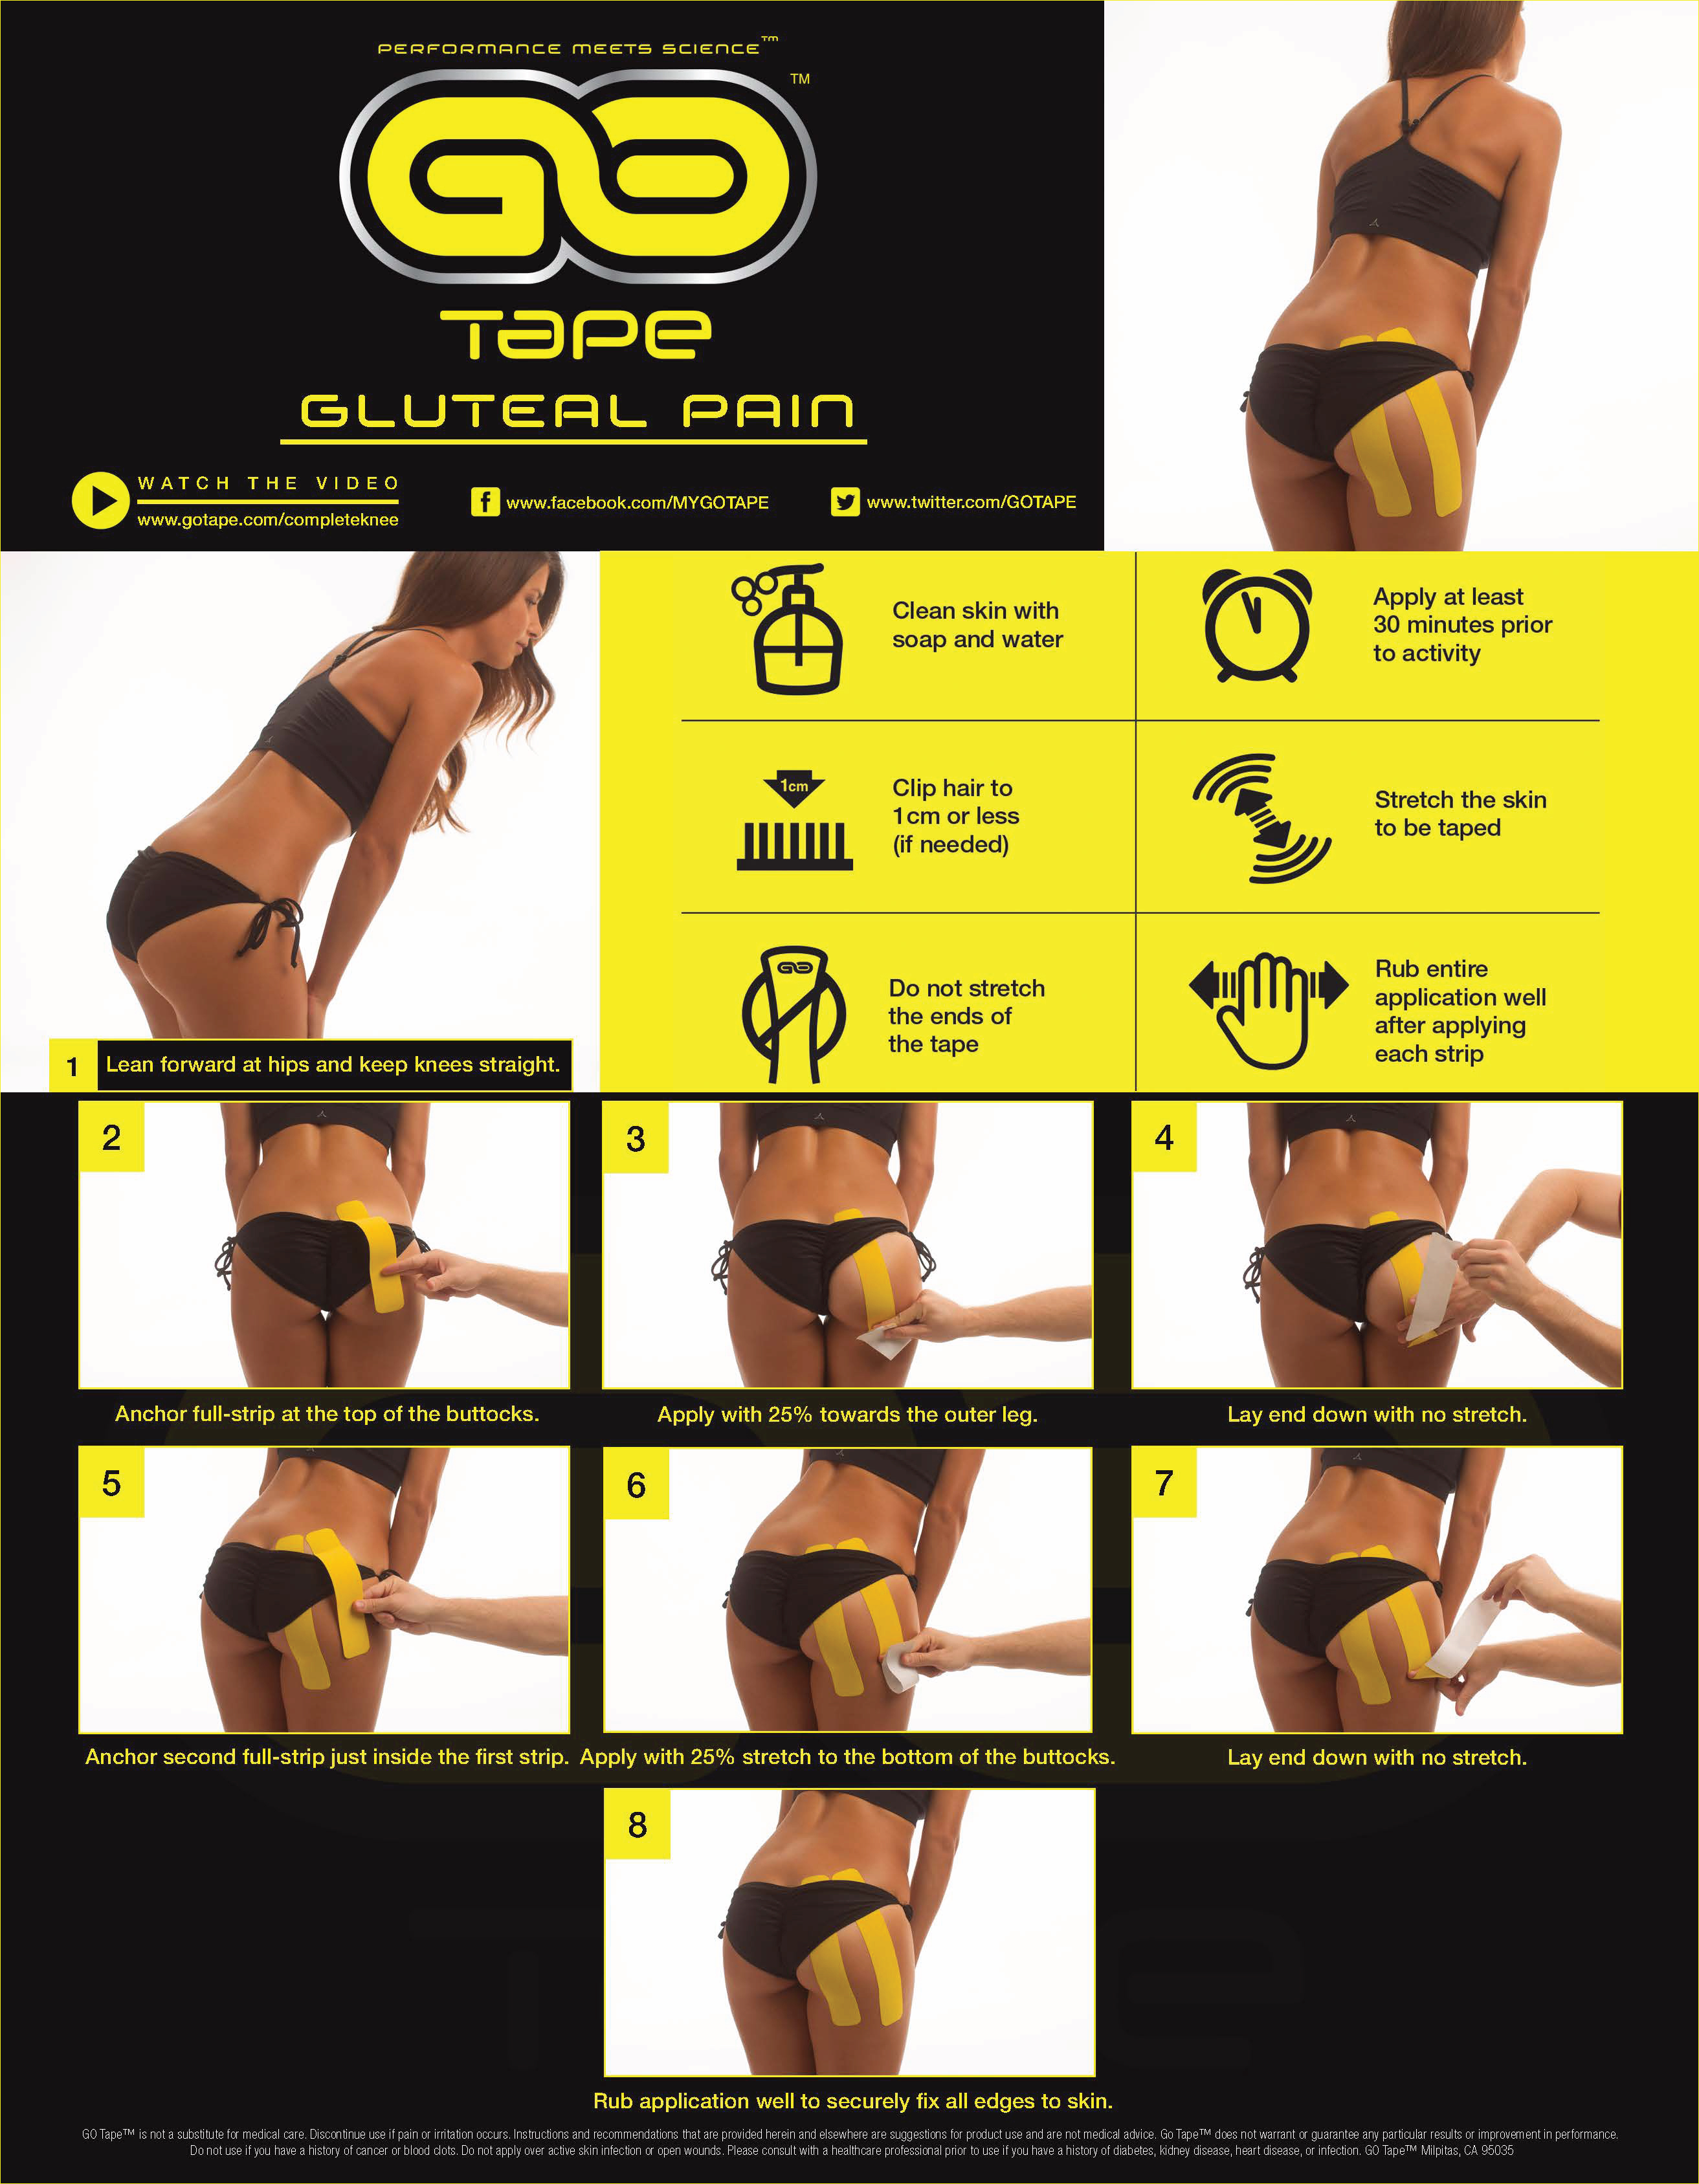 GO_Tape_Application-Instructions_Gluteal_Pain